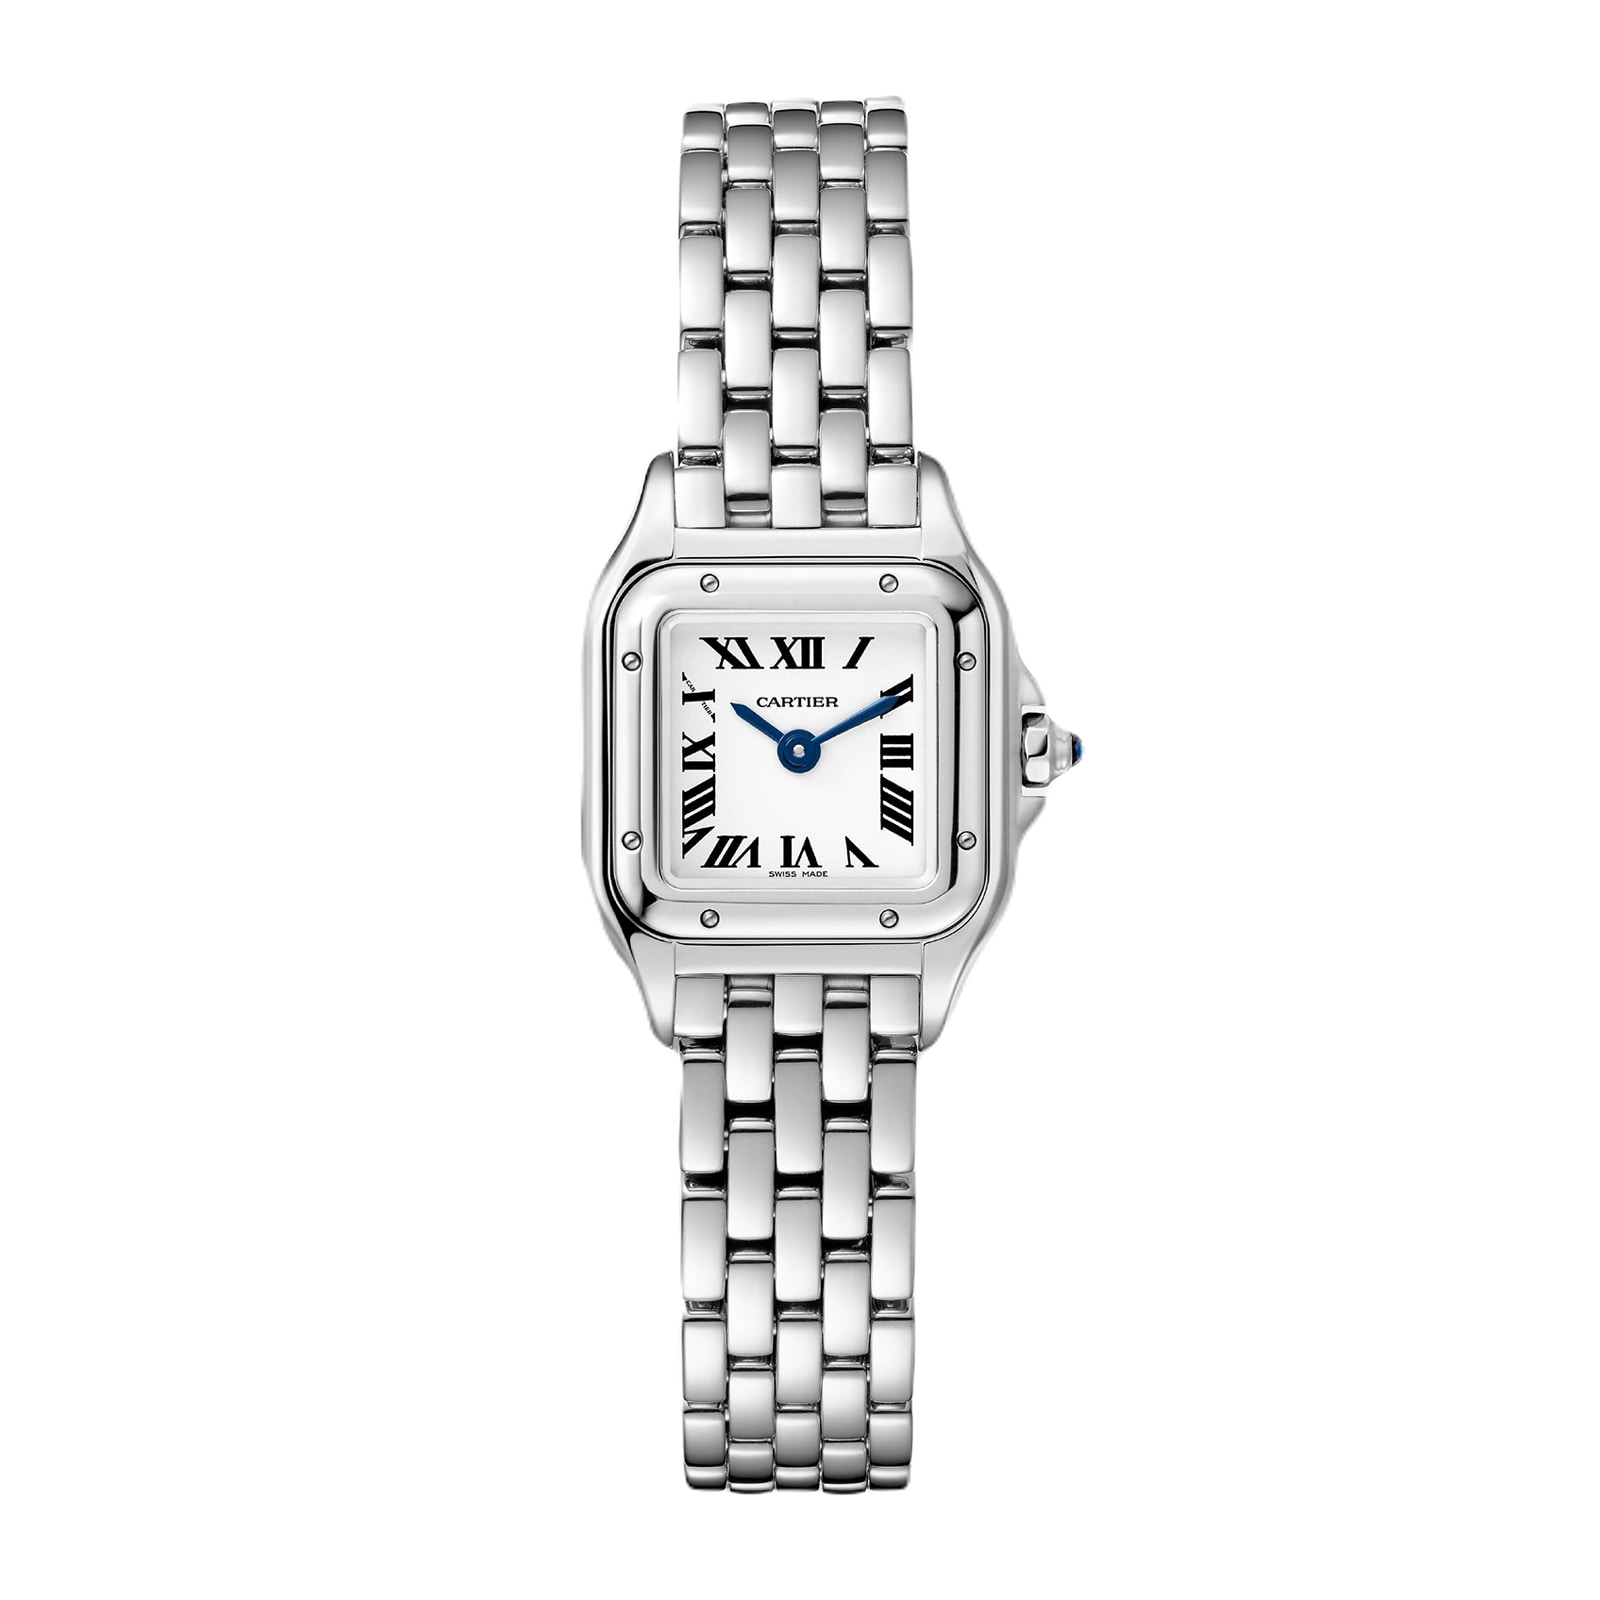 history of cartier panthere watch